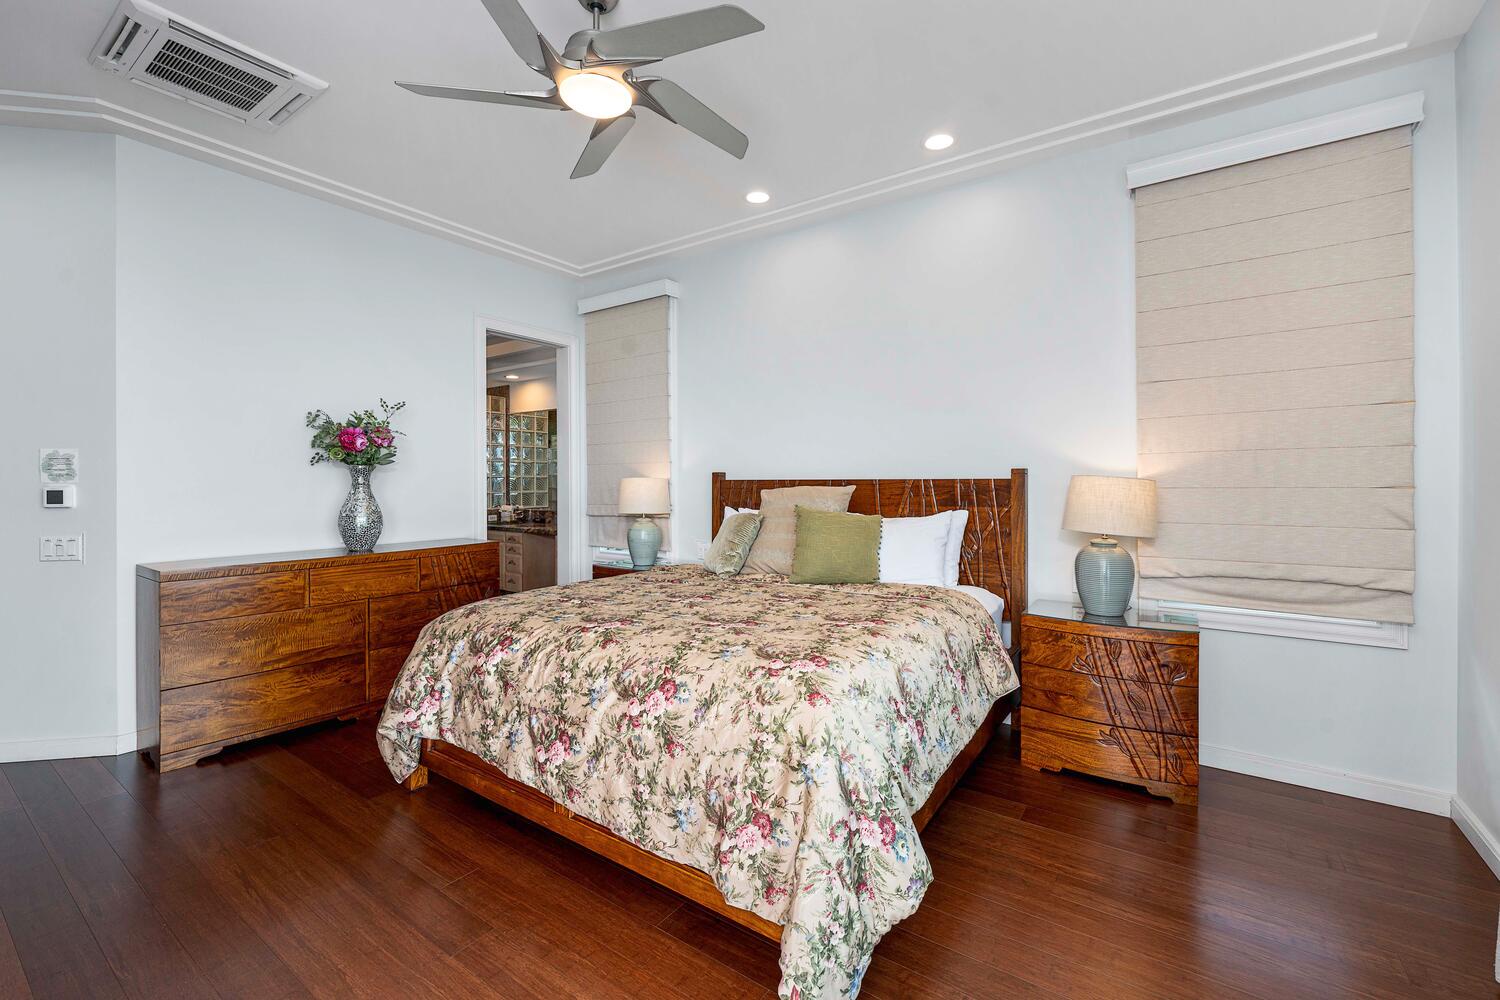 Kailua Kona Vacation Rentals, Blue Hawaii - The primary bedroom with warm lightings and an airy ambiance.